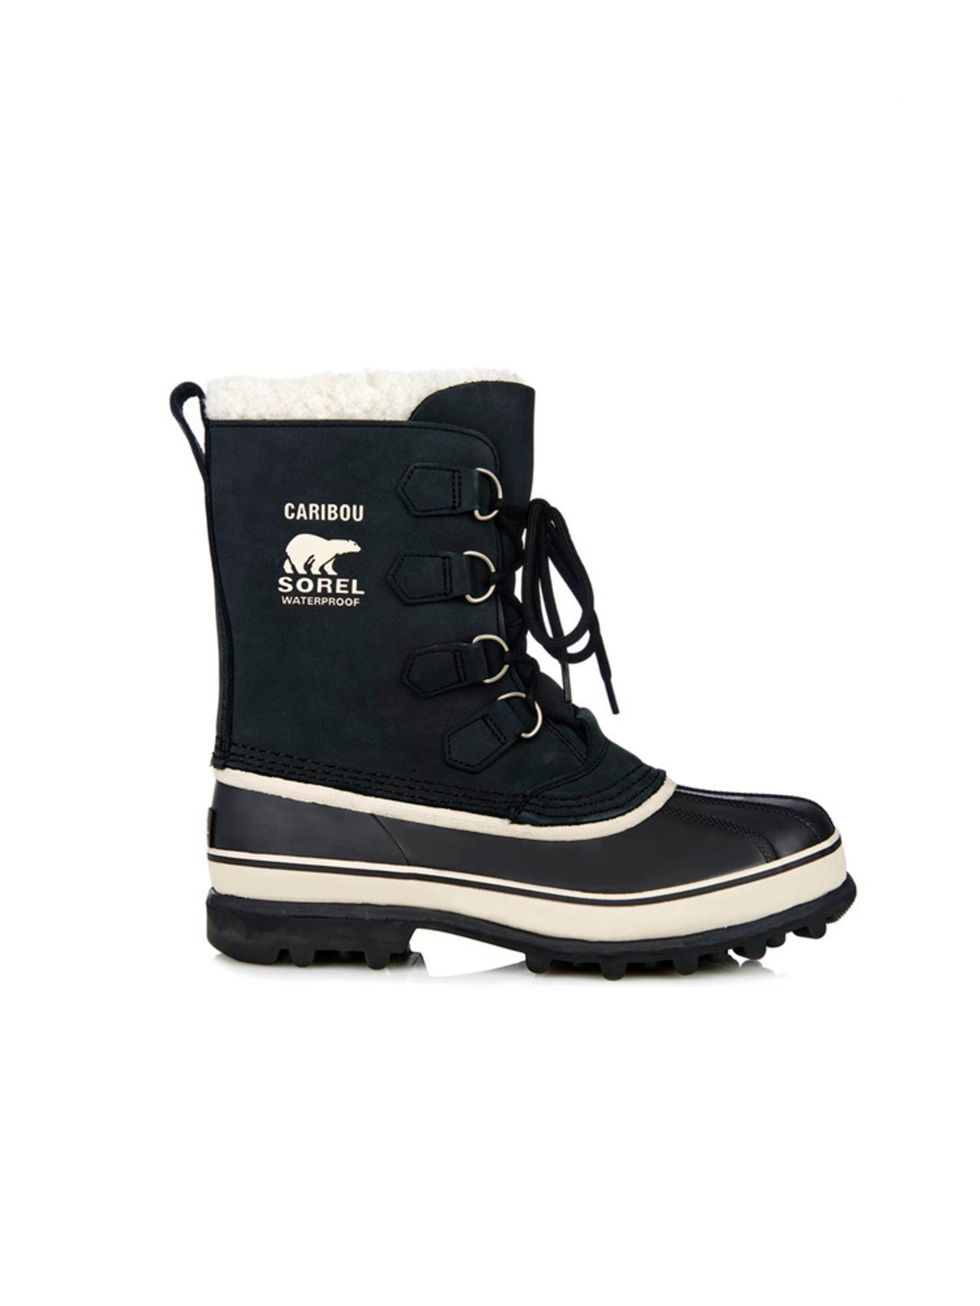 <p>Sorel suede and rubber boots, £130 at <a href="http://www.matchesfashion.com/product/212387" target="_blank">matchesfashion.com</a></p>